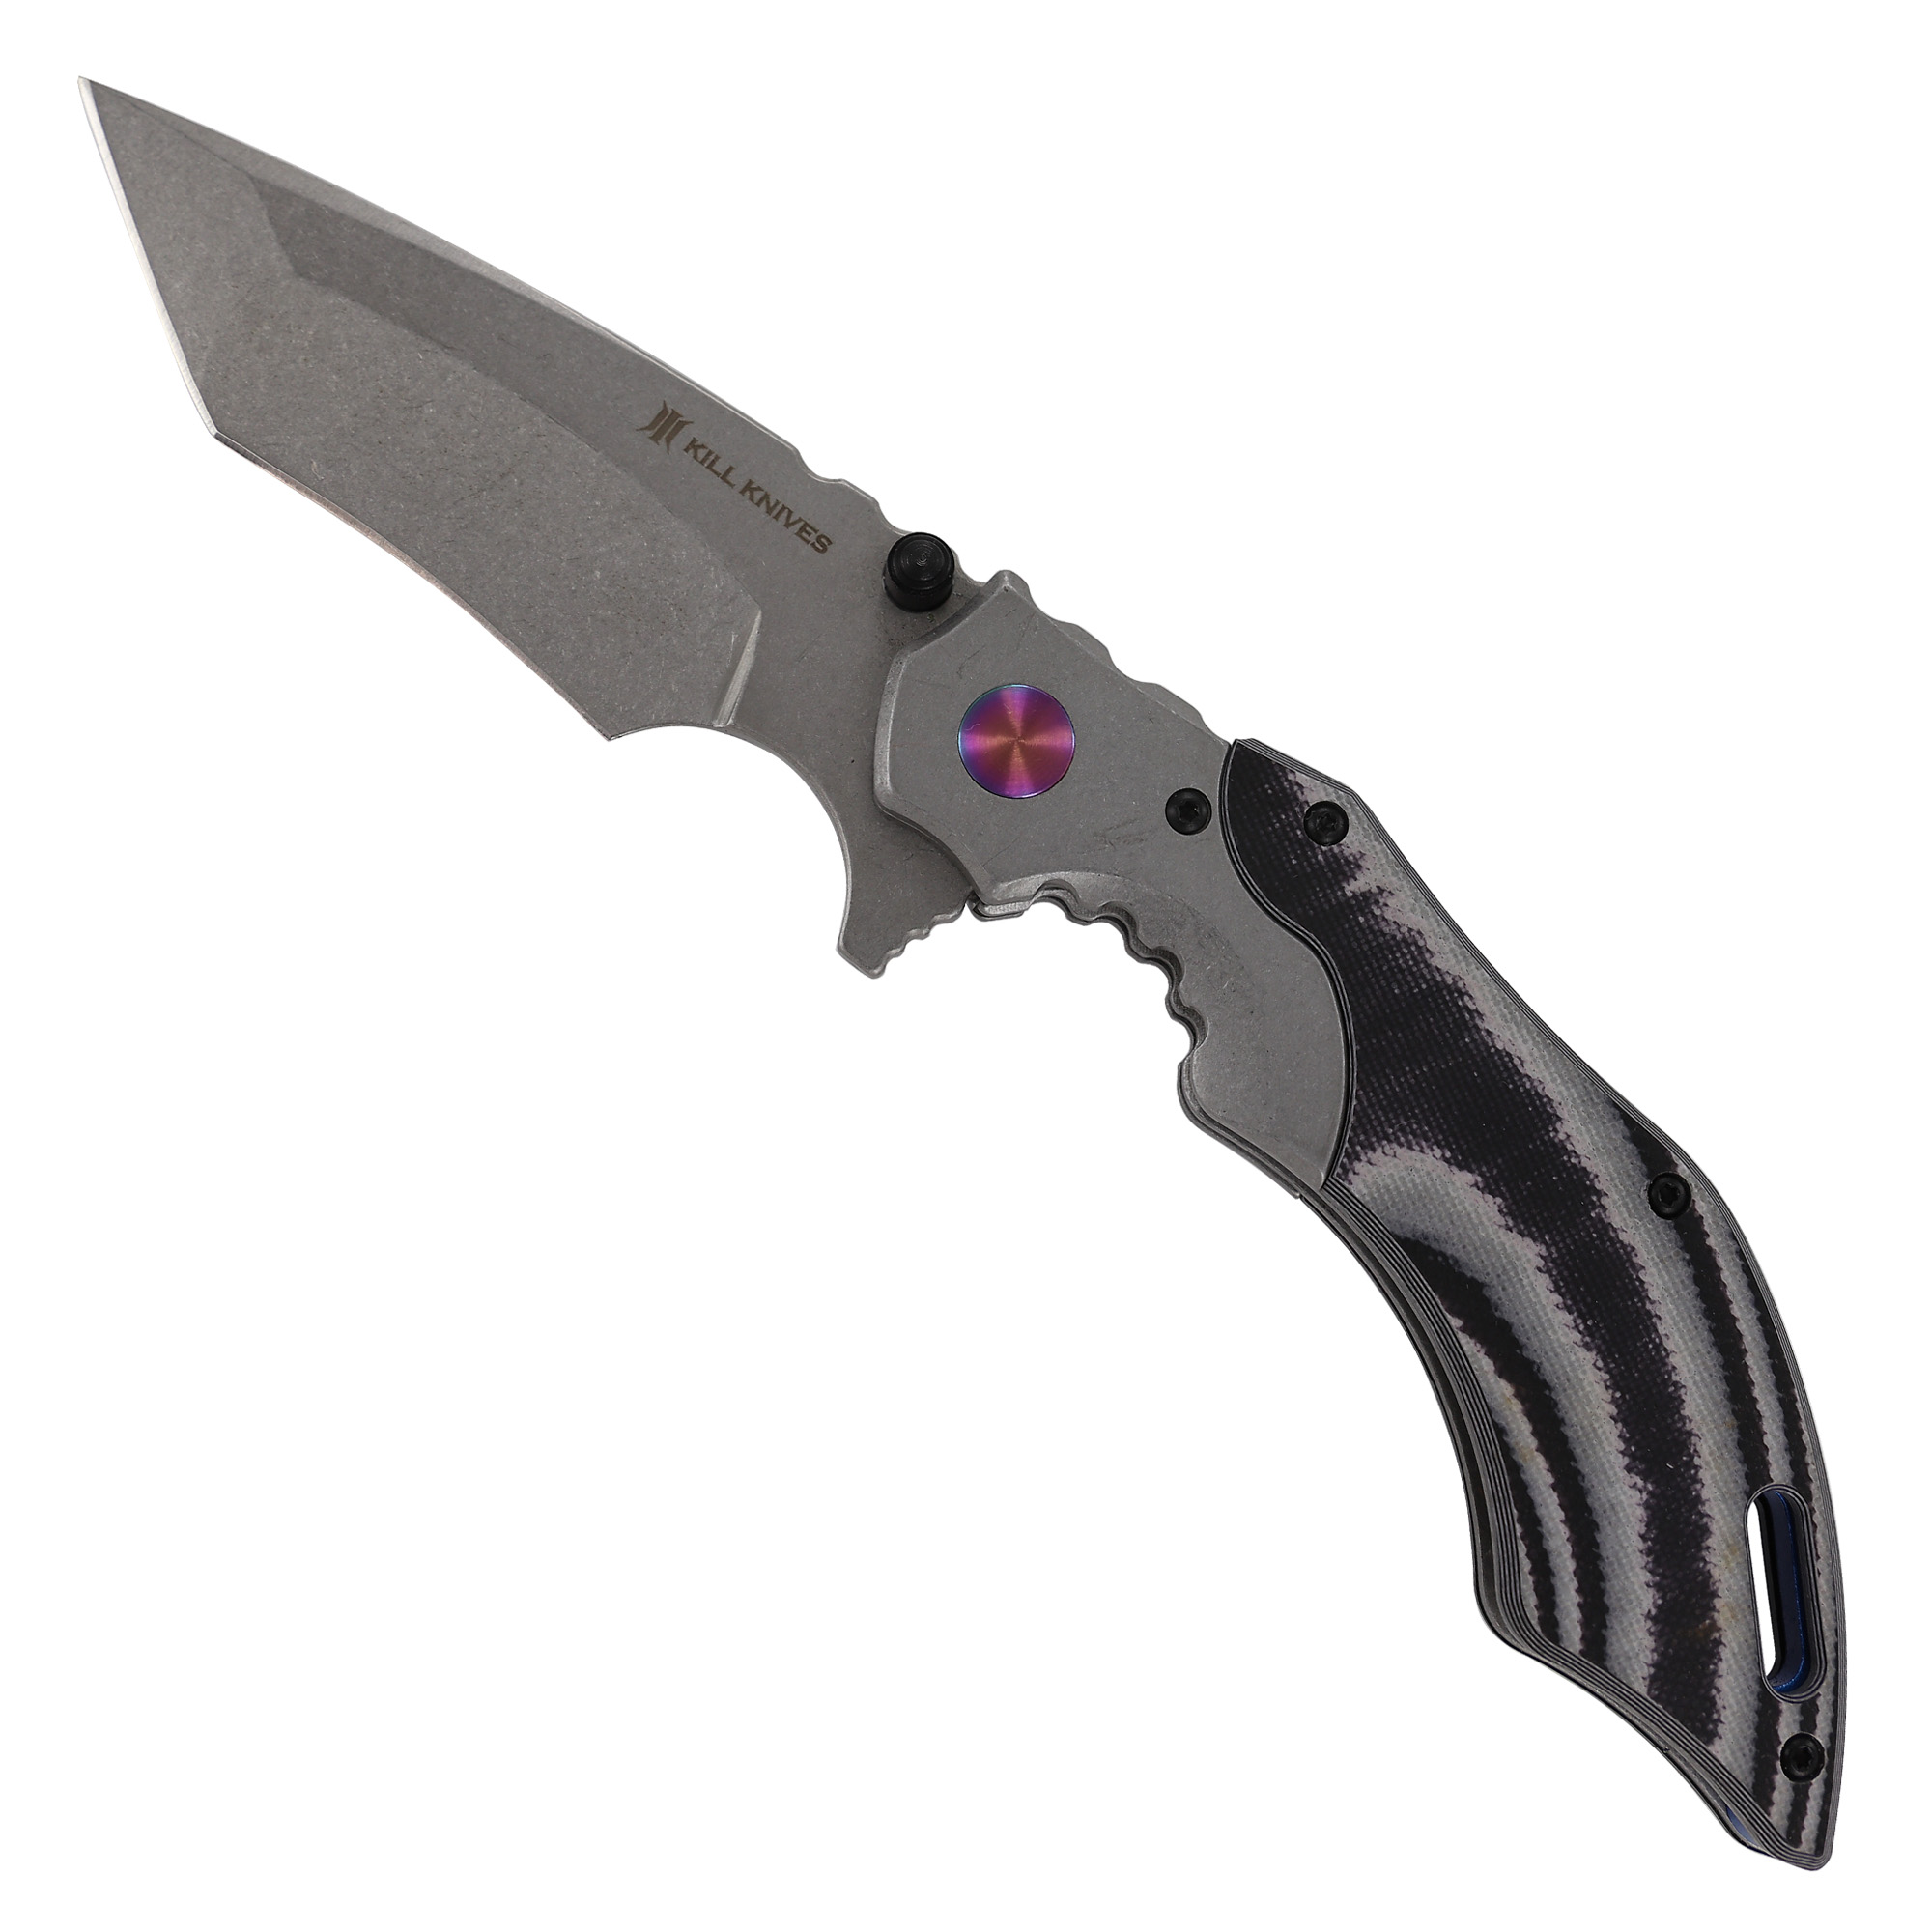 KILL KNIVES ? Apocalyptic High Quality D2 Steel Ball Bearing Spring Assist Pocket KNIFE